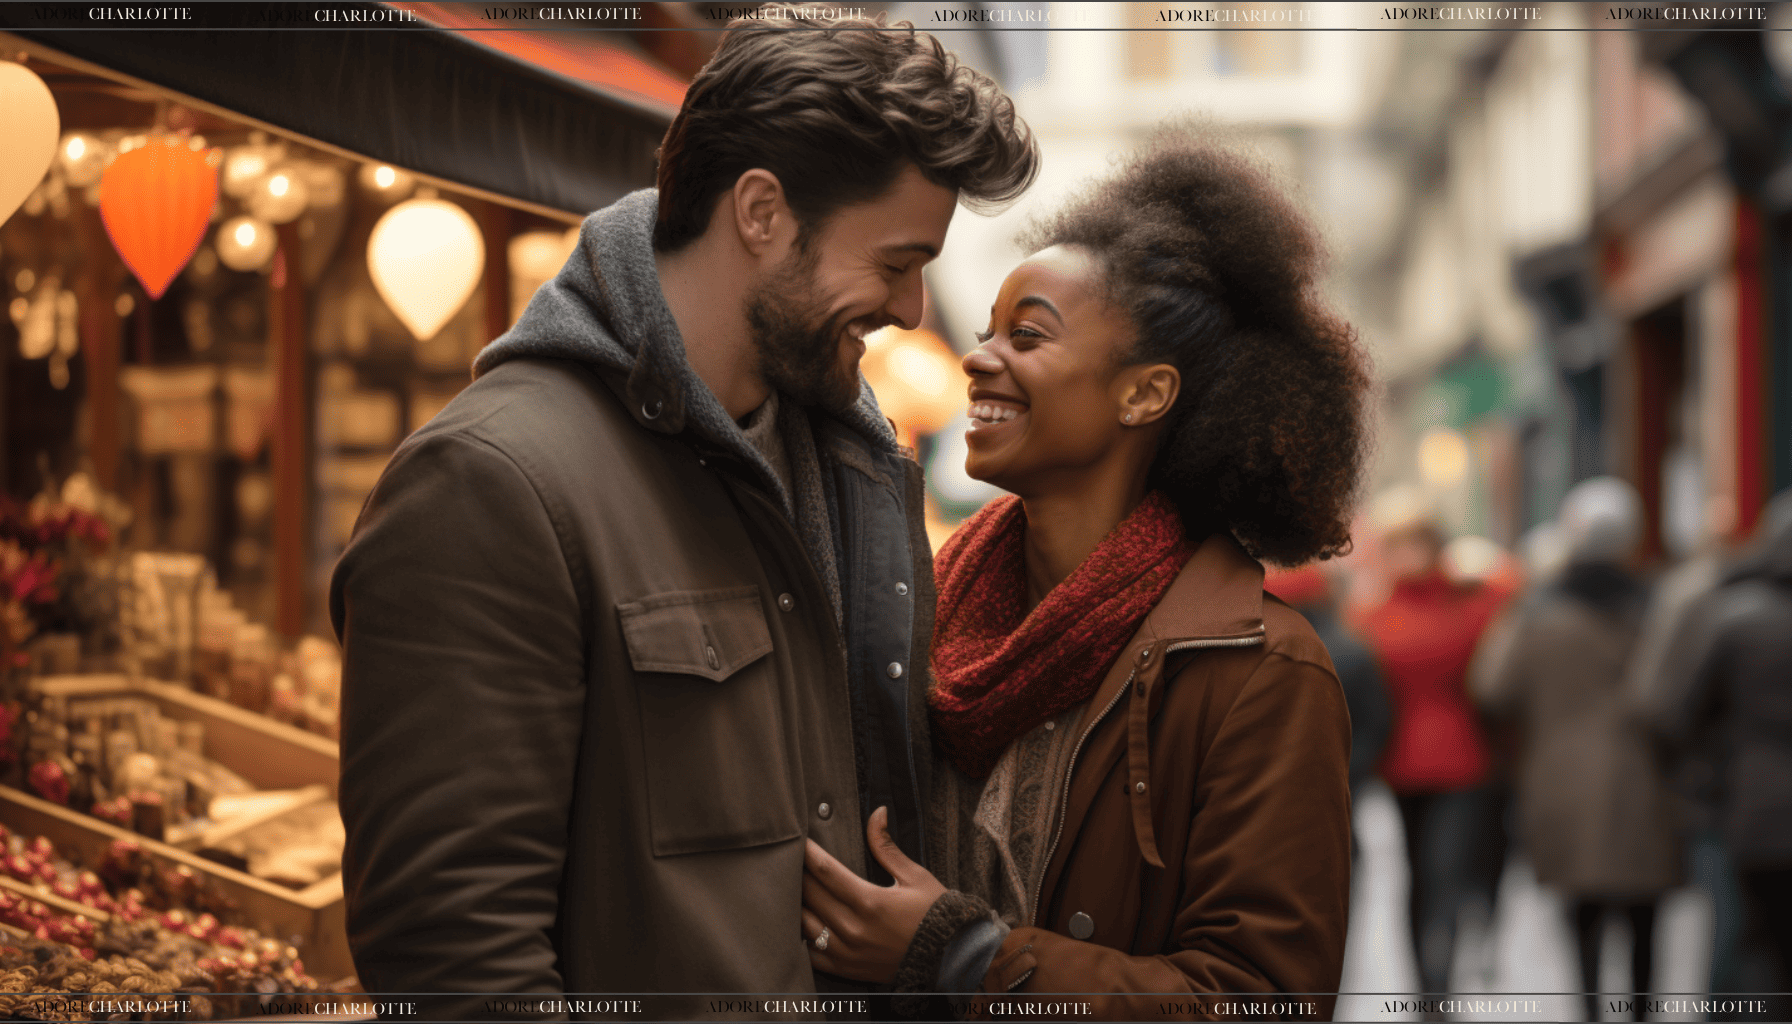 Smiling biracial couple in a cozy embrace on a bustling city street, with the white male gazing affectionately at his light-skinned black partner who is looking back with a radiant smile. Both are stylishly dressed for chilly weather, suggesting a warm moment on a cool day. The blurred background with shoppers and colorful city lights creates an intimate and joyful atmosphere.Smiling biracial couple in a cozy embrace on a bustling city street, with the white male gazing affectionately at his light-skinned black partner who is looking back with a radiant smile. Both are stylishly dressed for chilly weather, suggesting a warm moment on a cool day. The blurred background with shoppers and colorful city lights creates an intimate and joyful atmosphere.